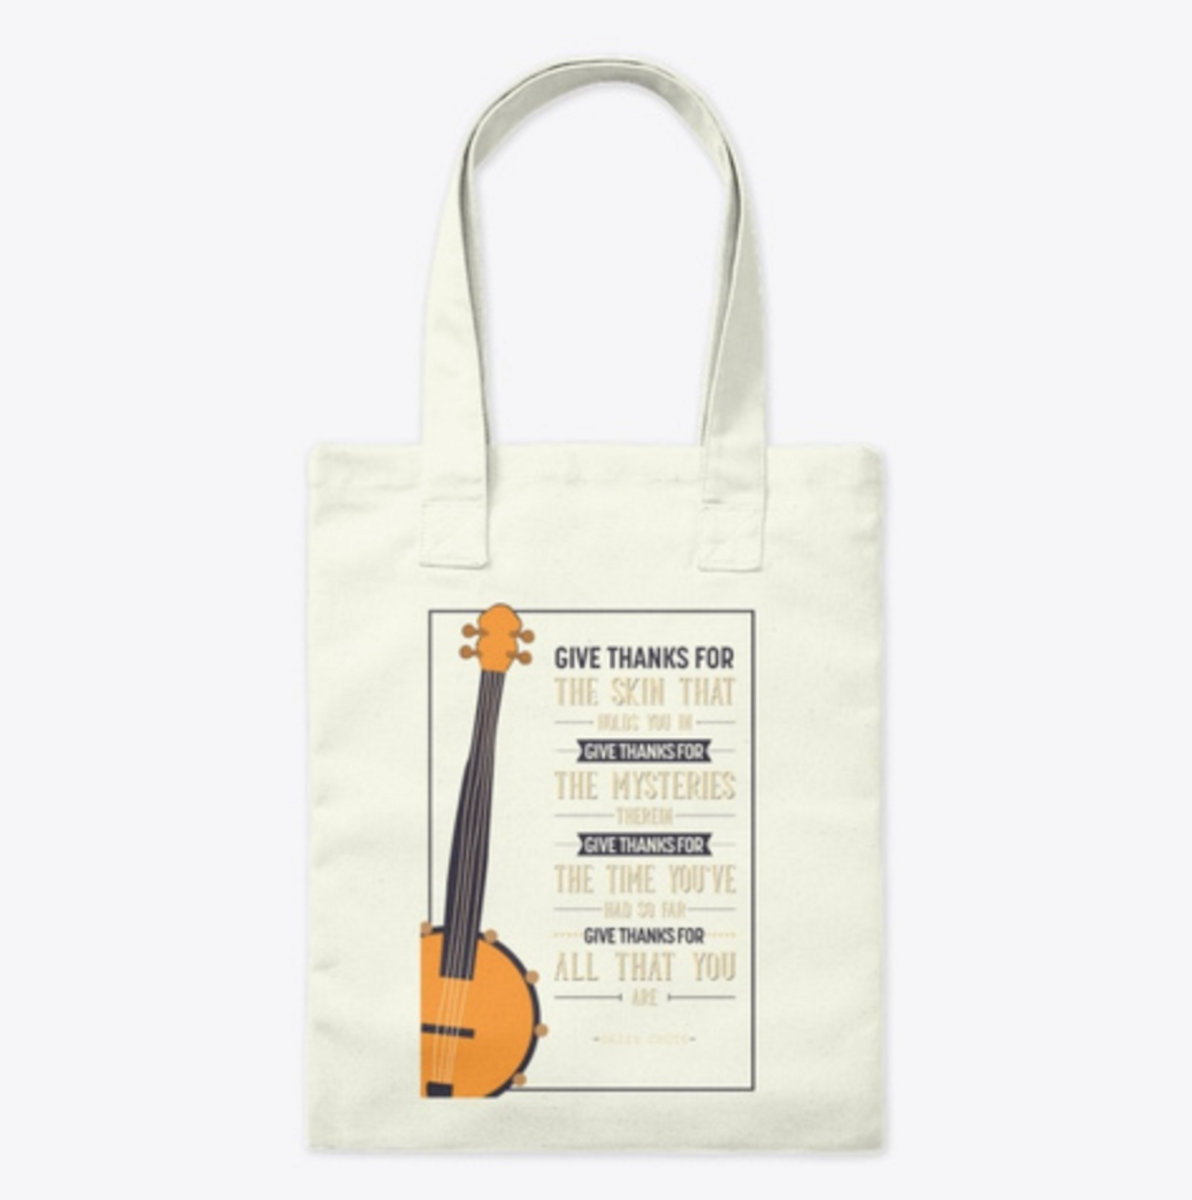 Handmade Tote Bags with Give Thanks Lyrics